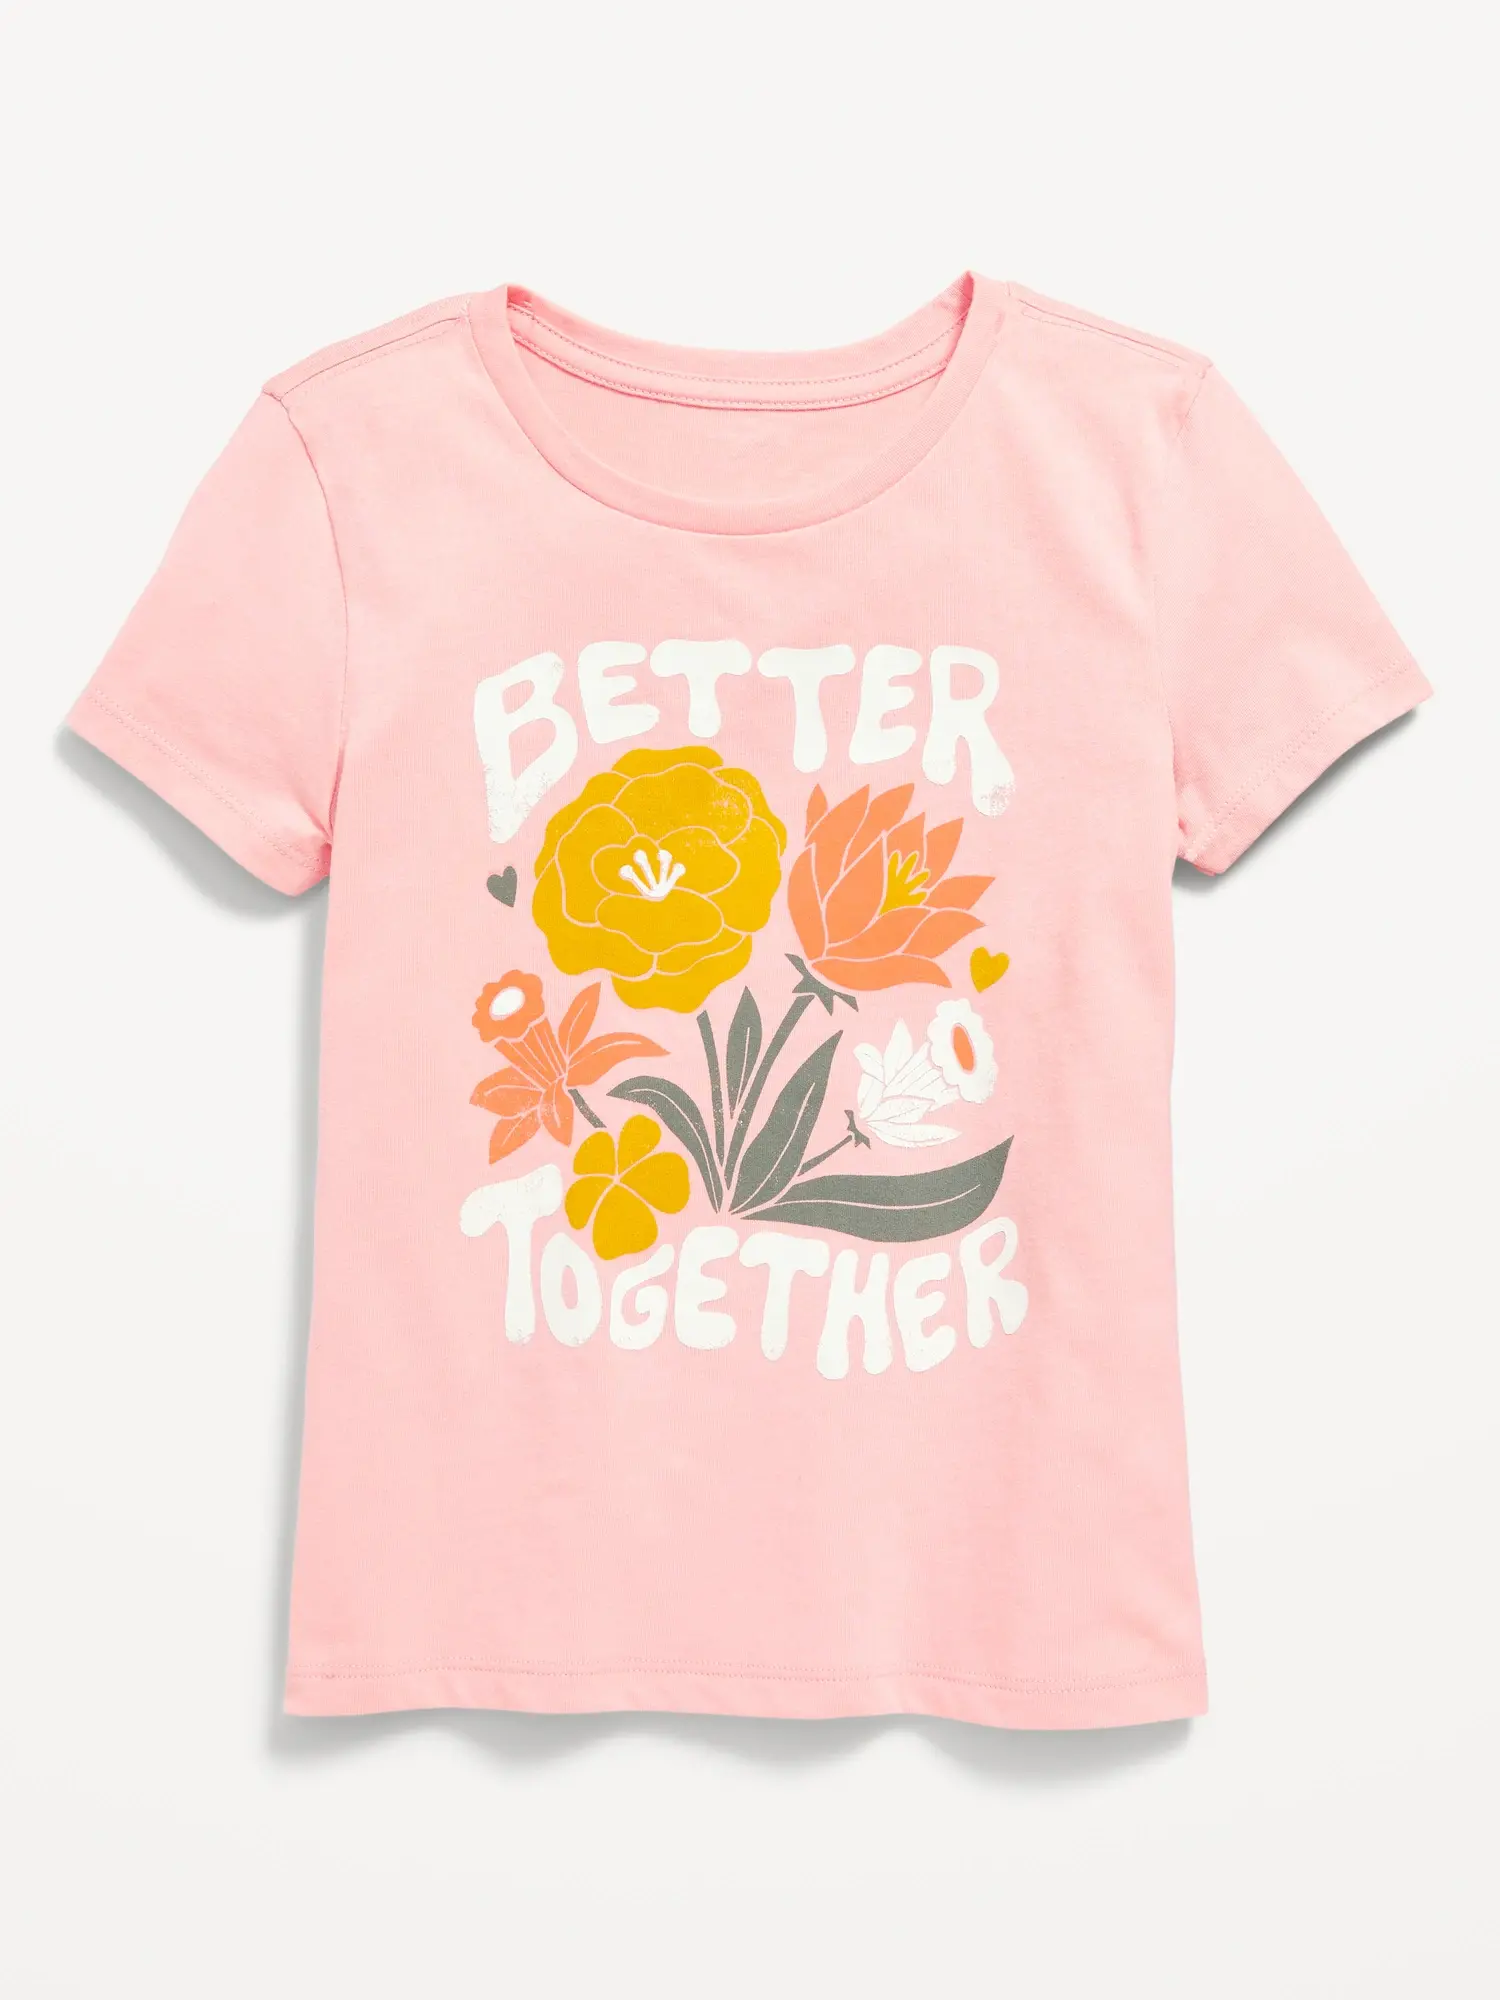 Old Navy Short-Sleeve Graphic T-Shirt for Girls pink. 1